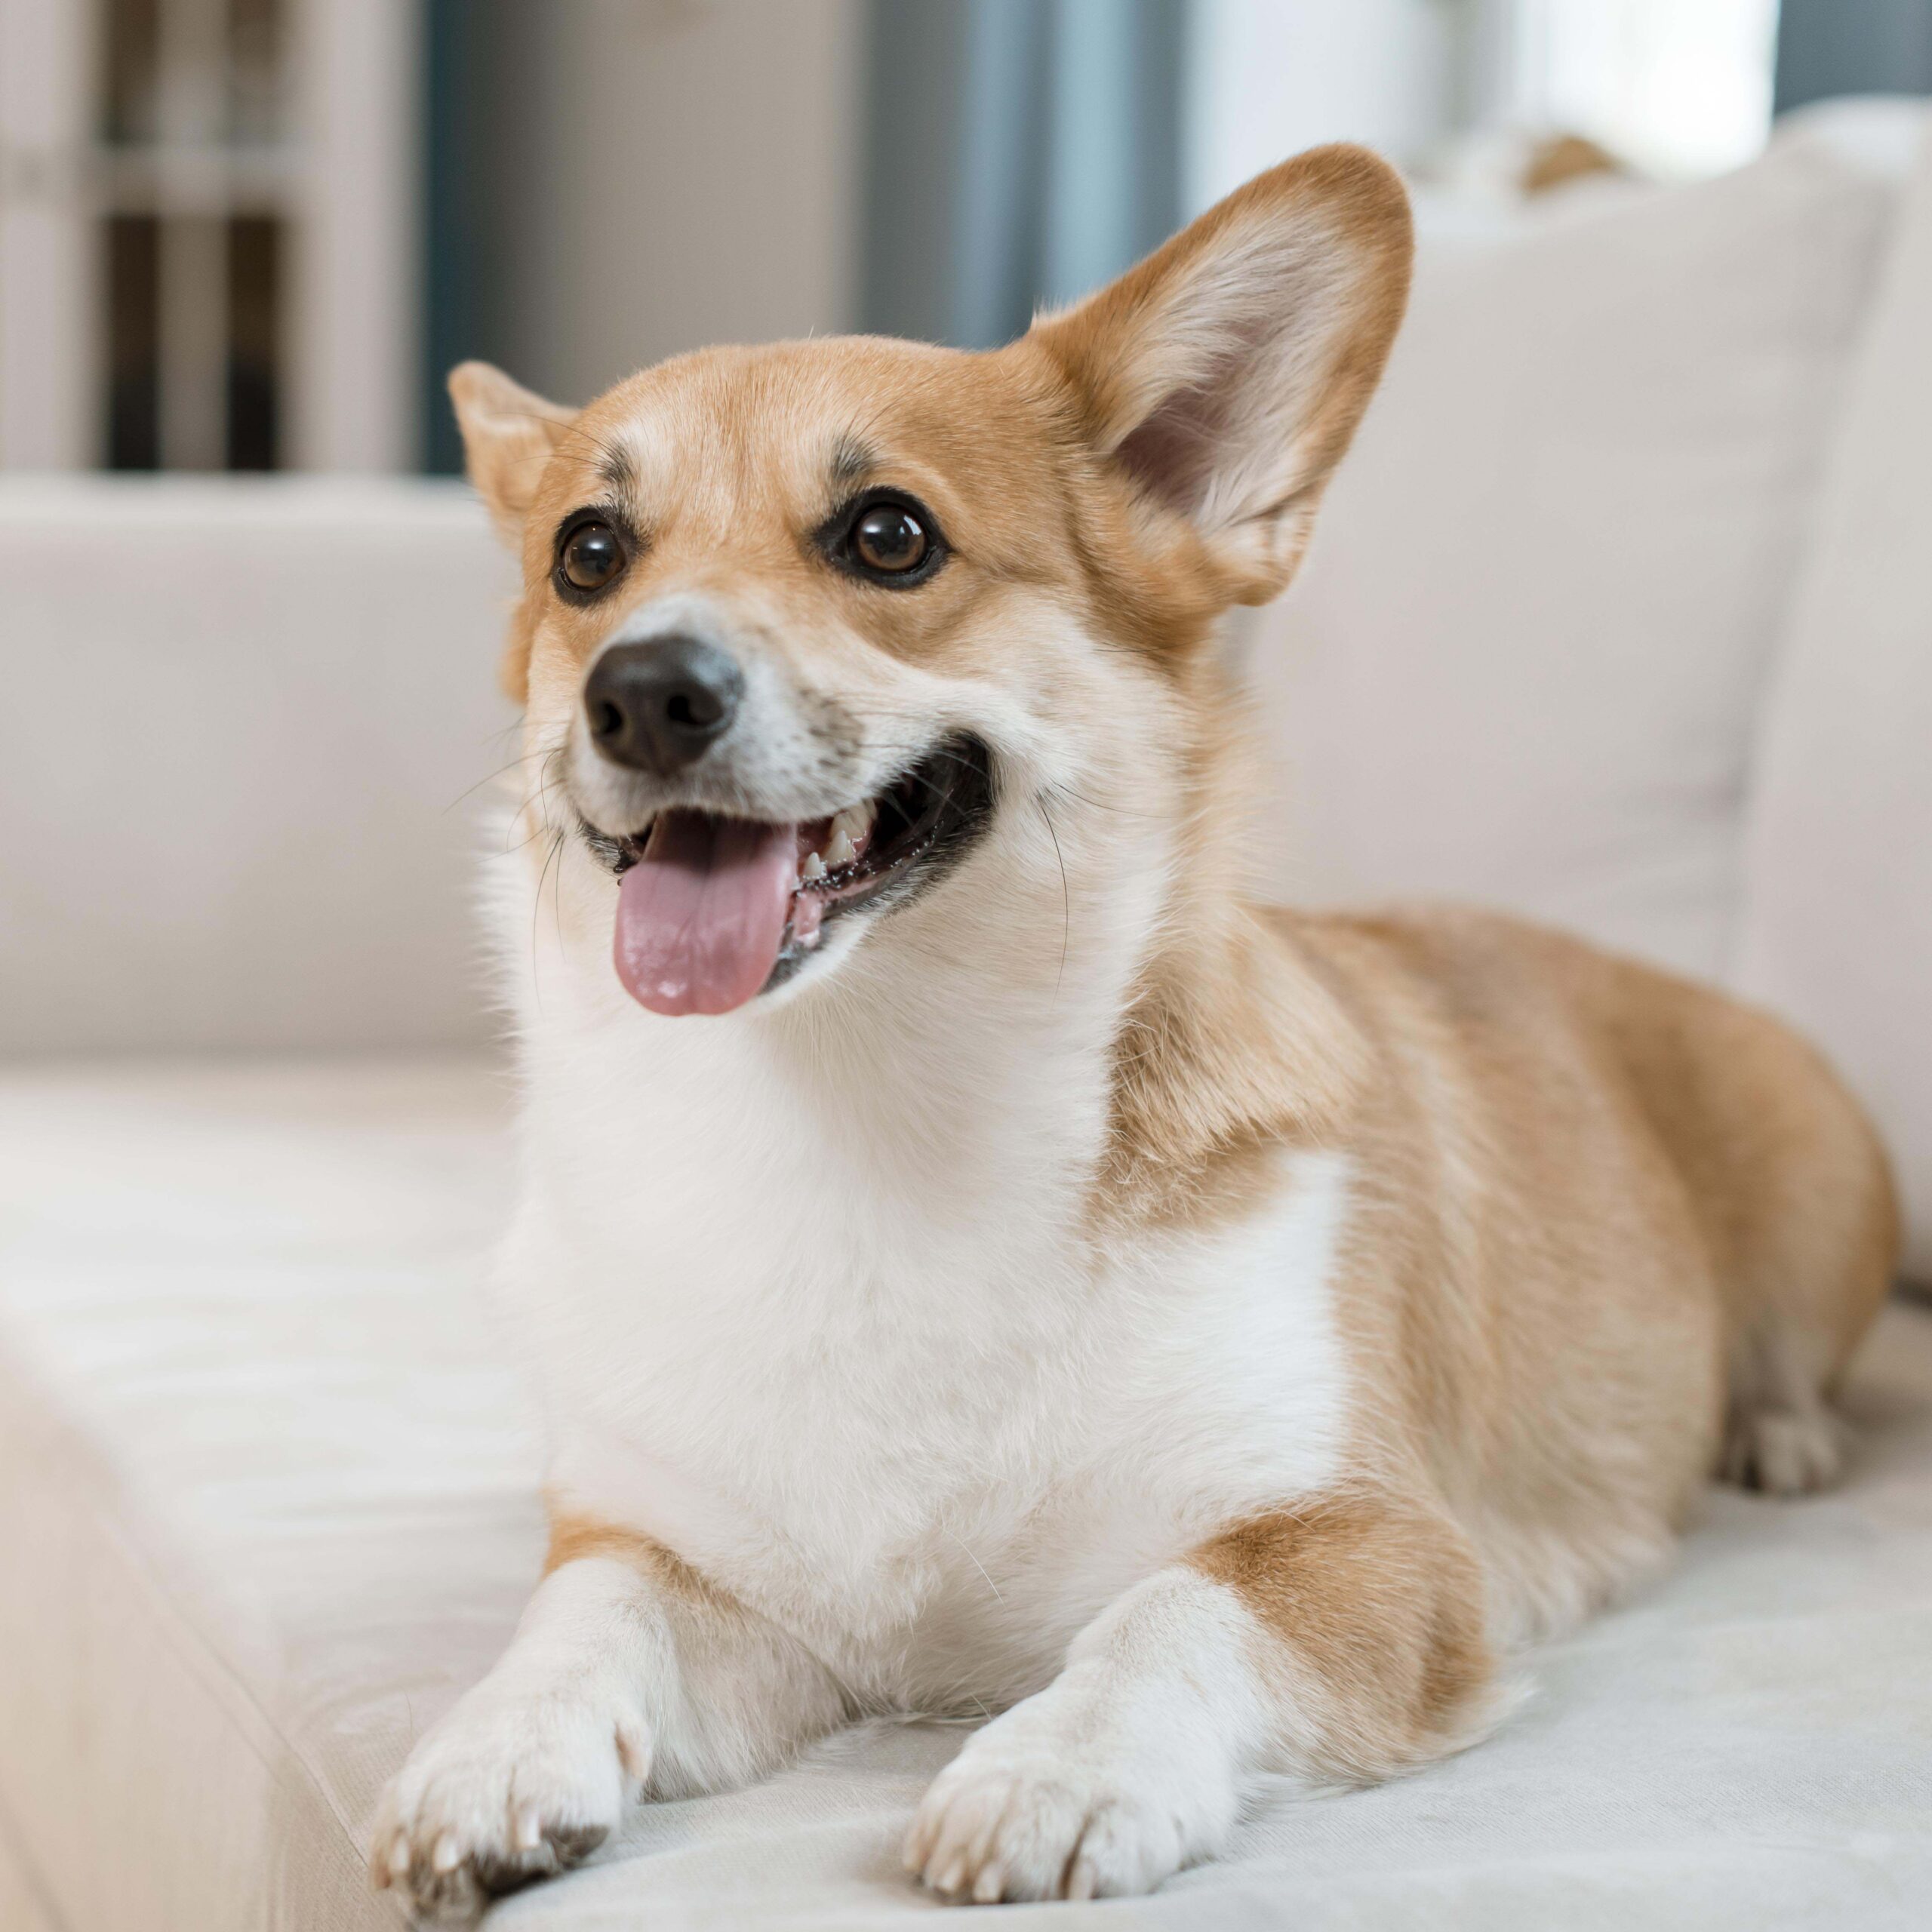 front-view-cute-dog-couch-home